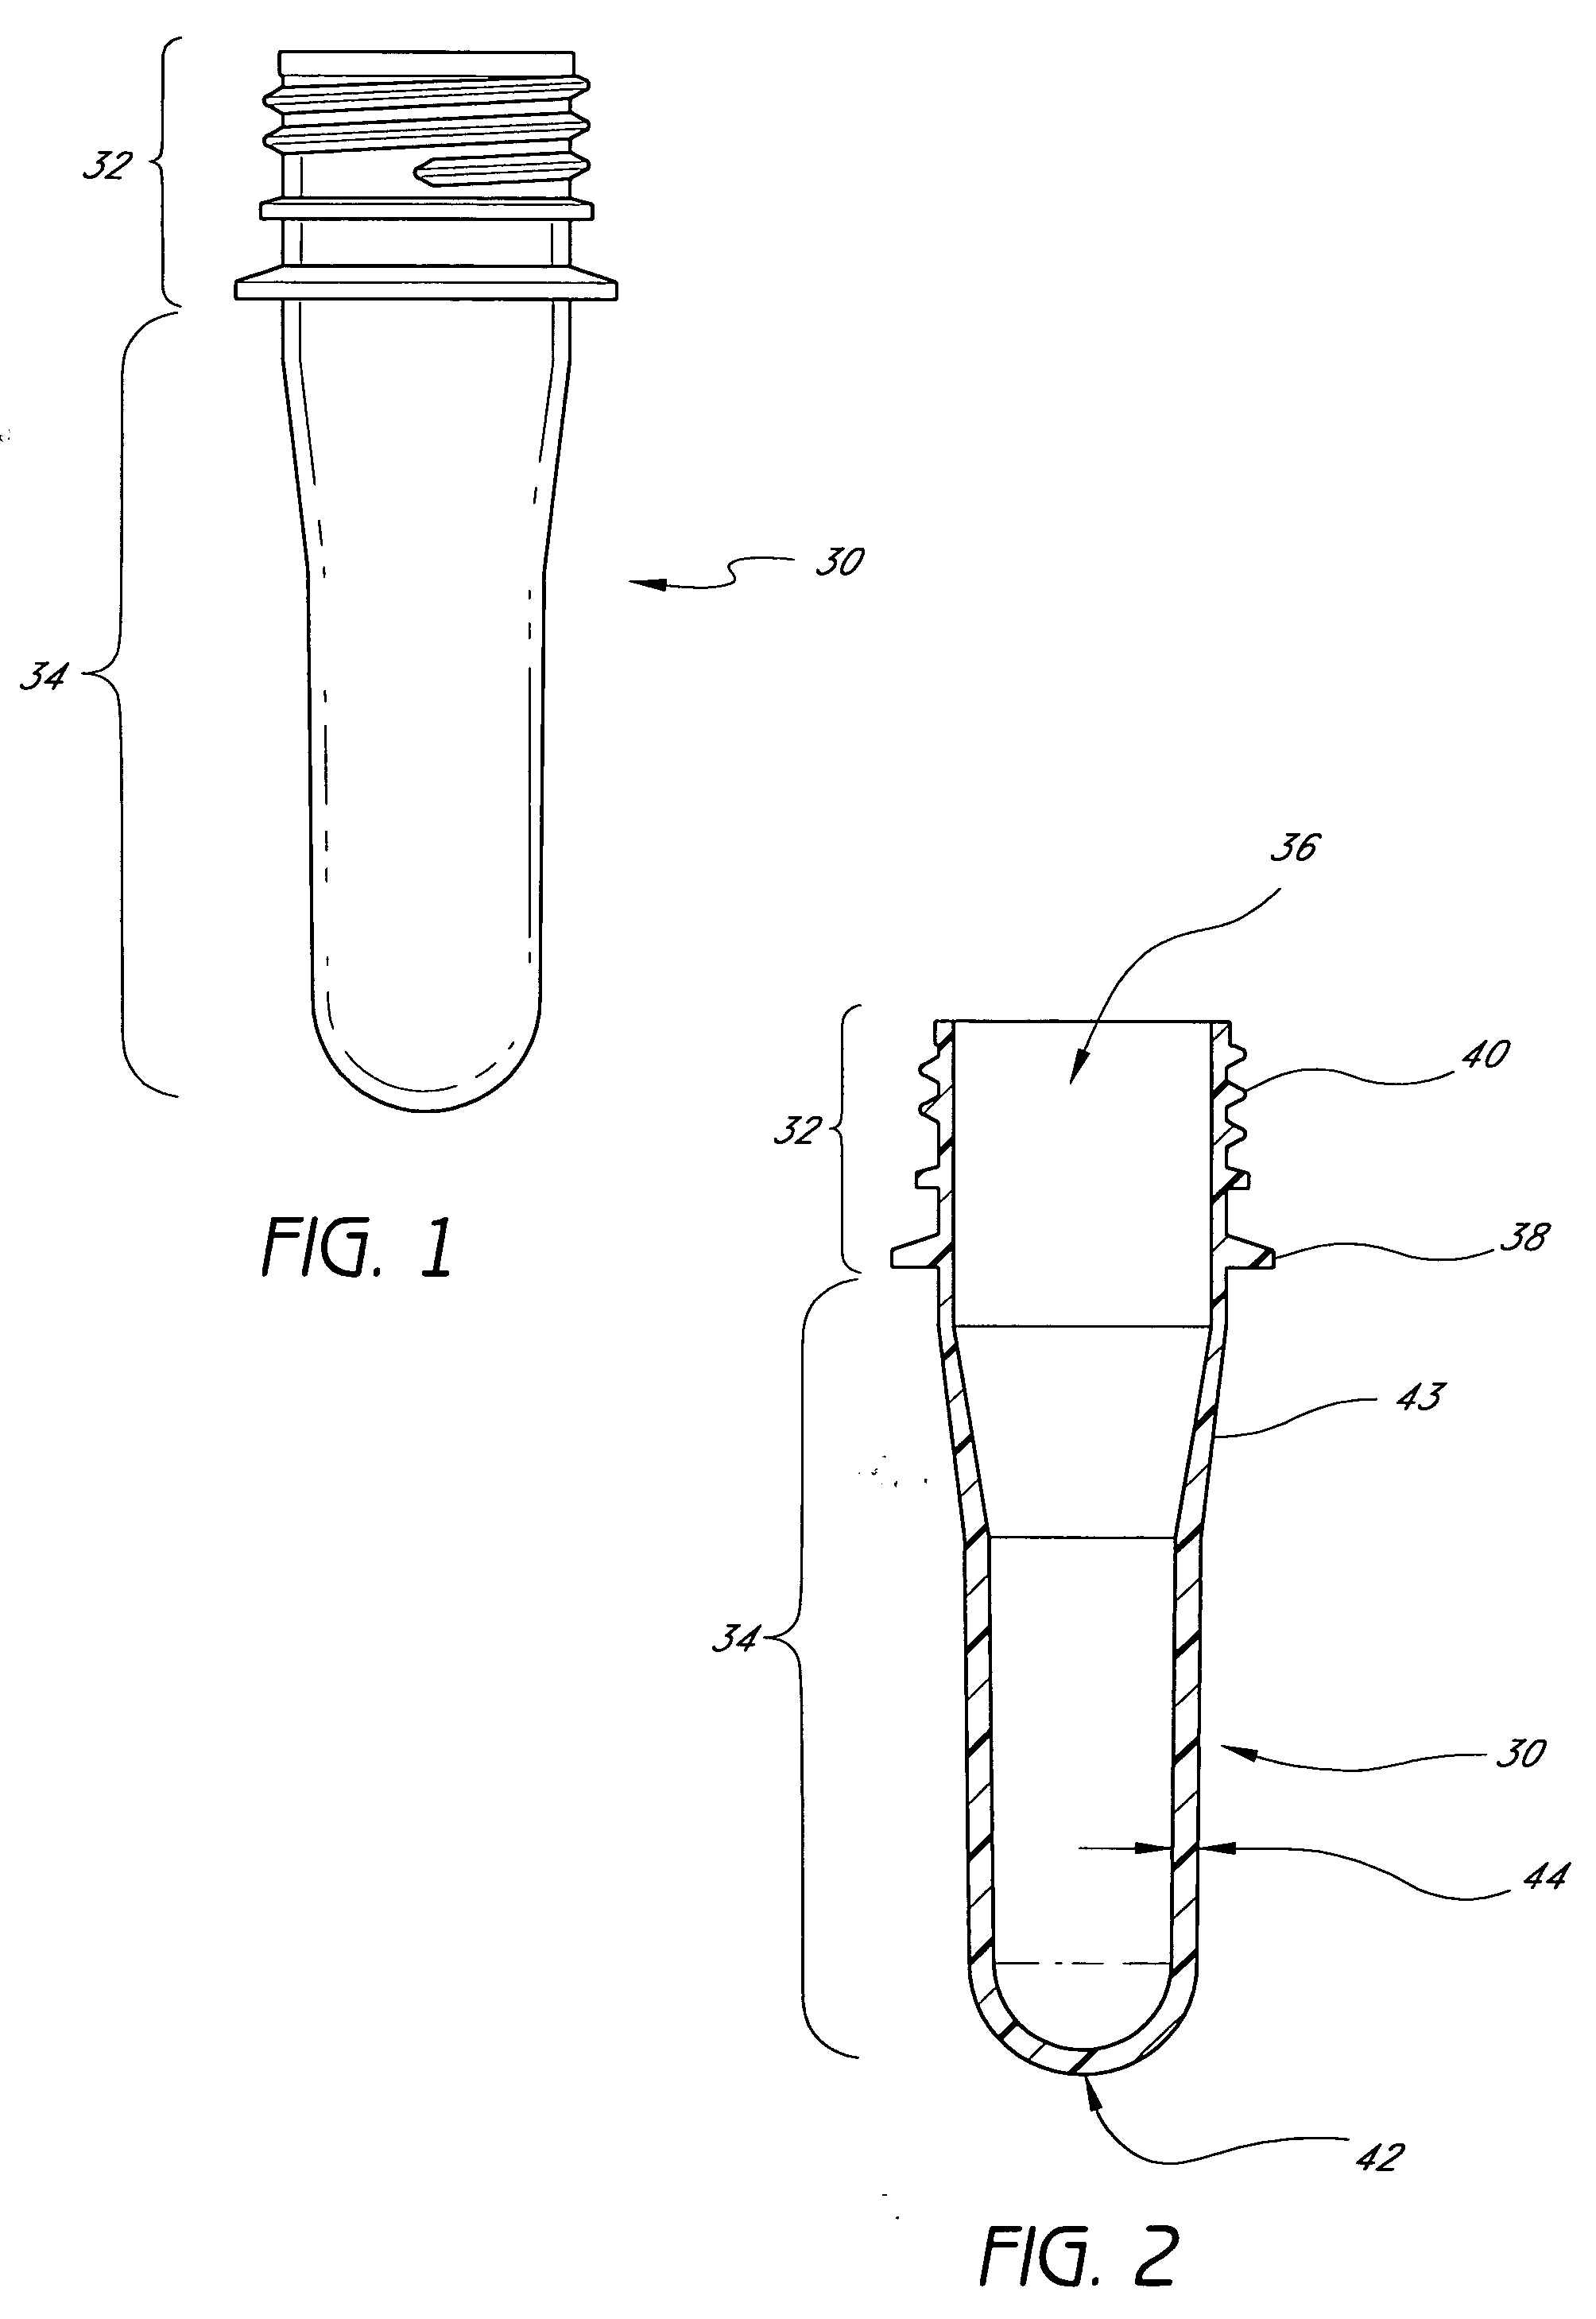 Mono and multi-layer articles and compression methods of making the same